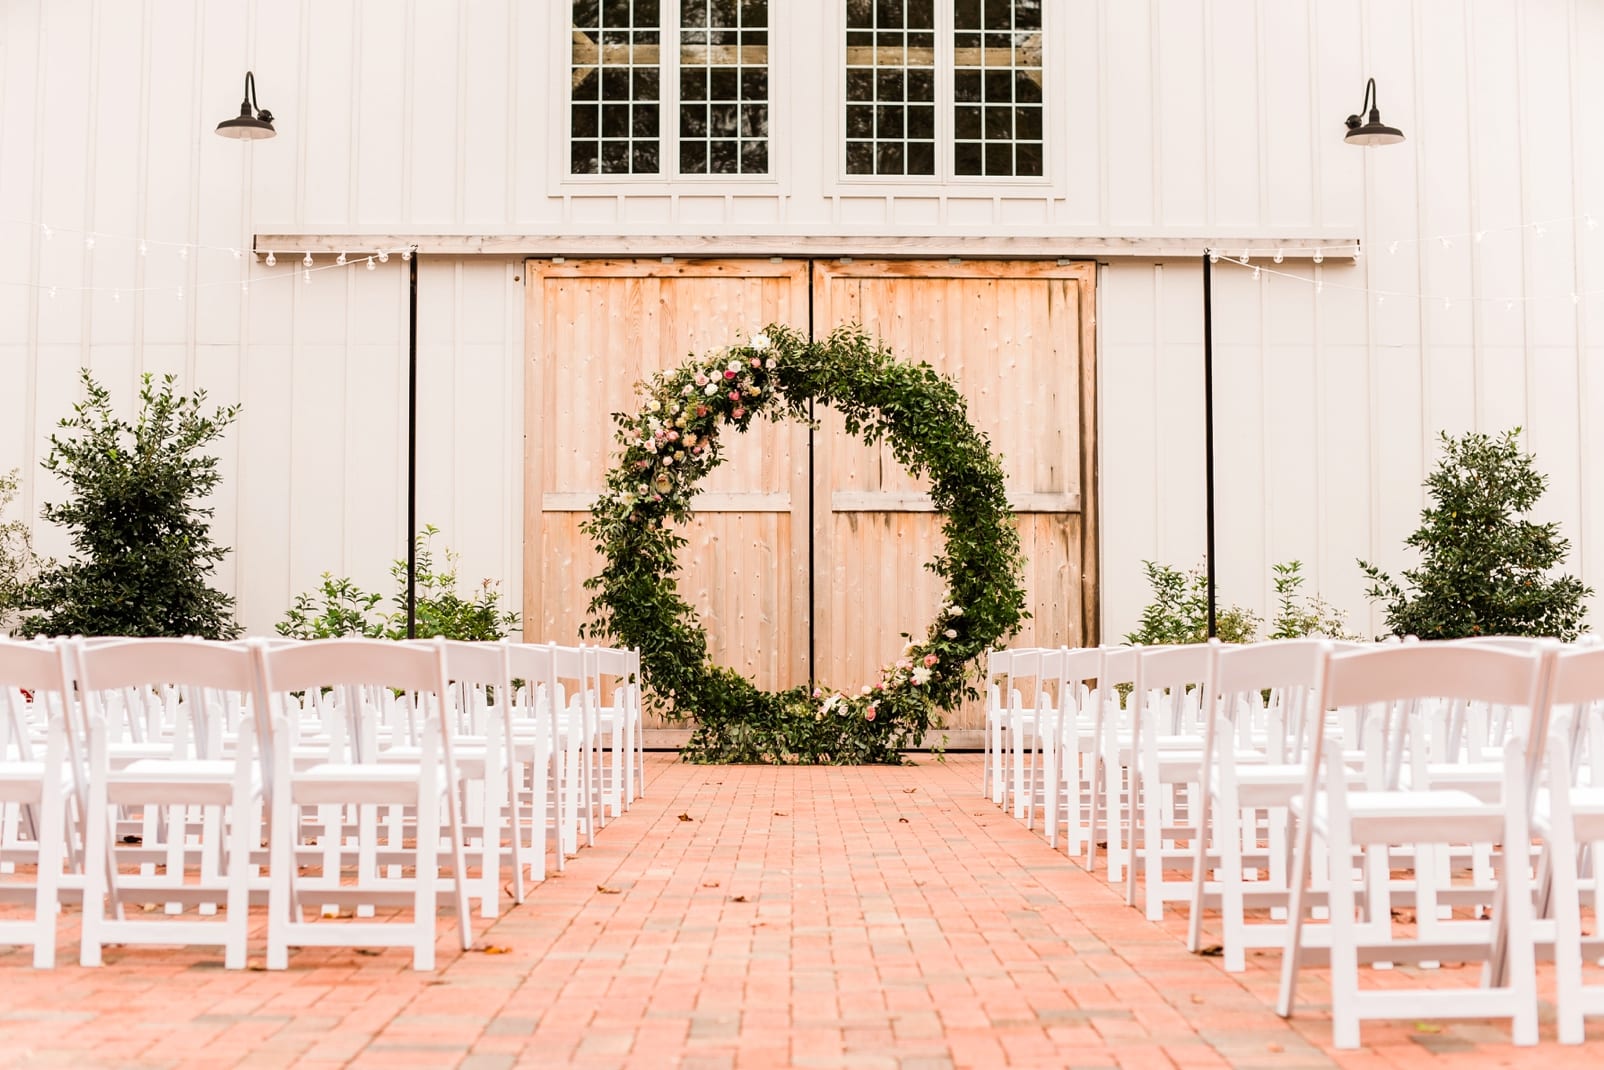 Barn of Chapel Hill ceremony space with white chairs and large circle floral installation in front of wooden barn doors photo